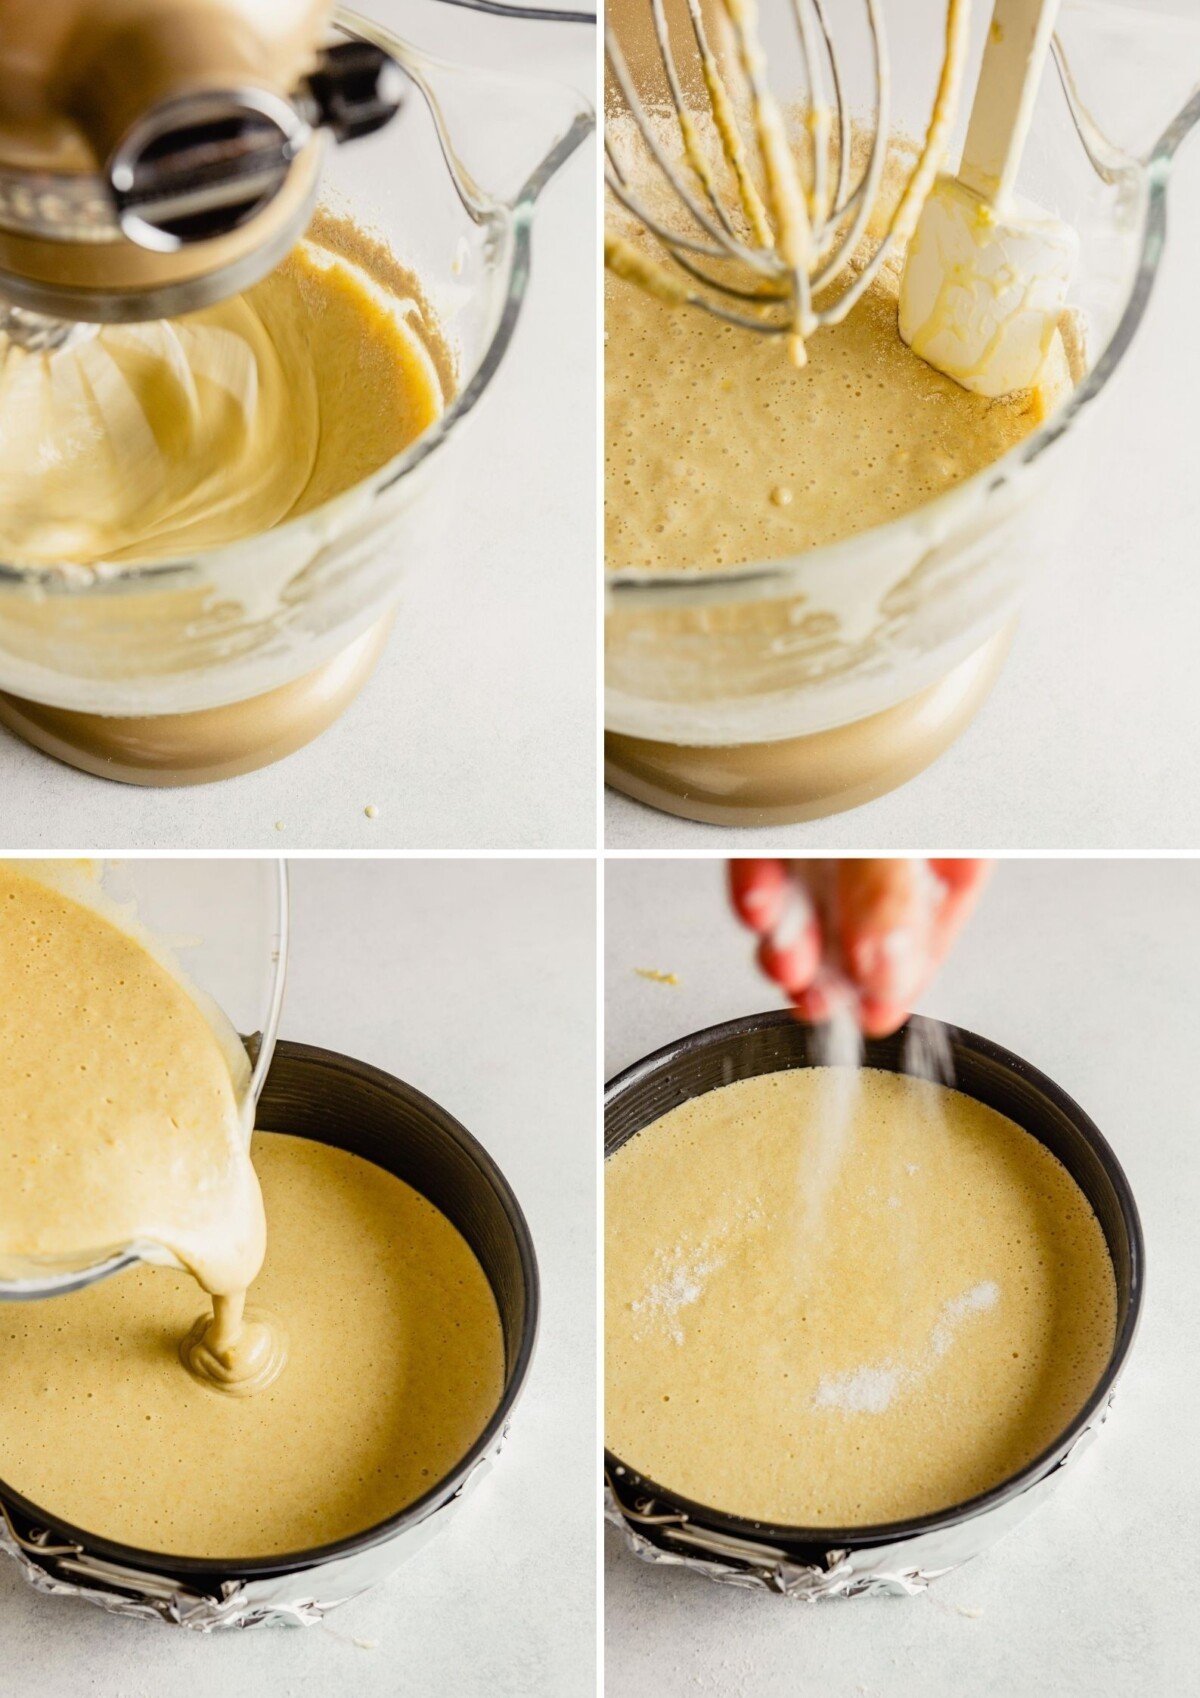 grid of images showing the process of making cake—whipping batter, scraping sides of bowl, adding batter to pan, sprinkling with sugar